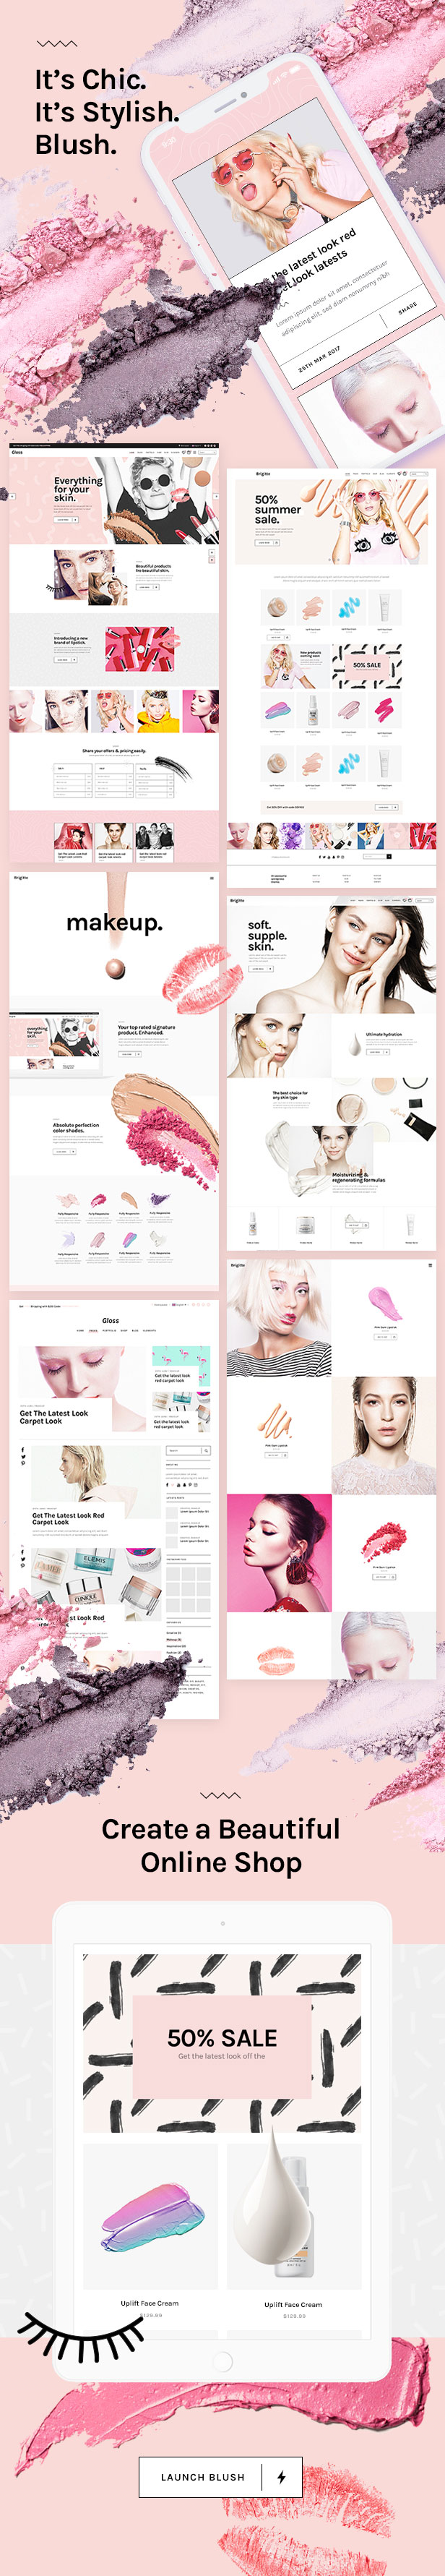 Blush - A Trendy Beauty and Lifestyle Theme - 1